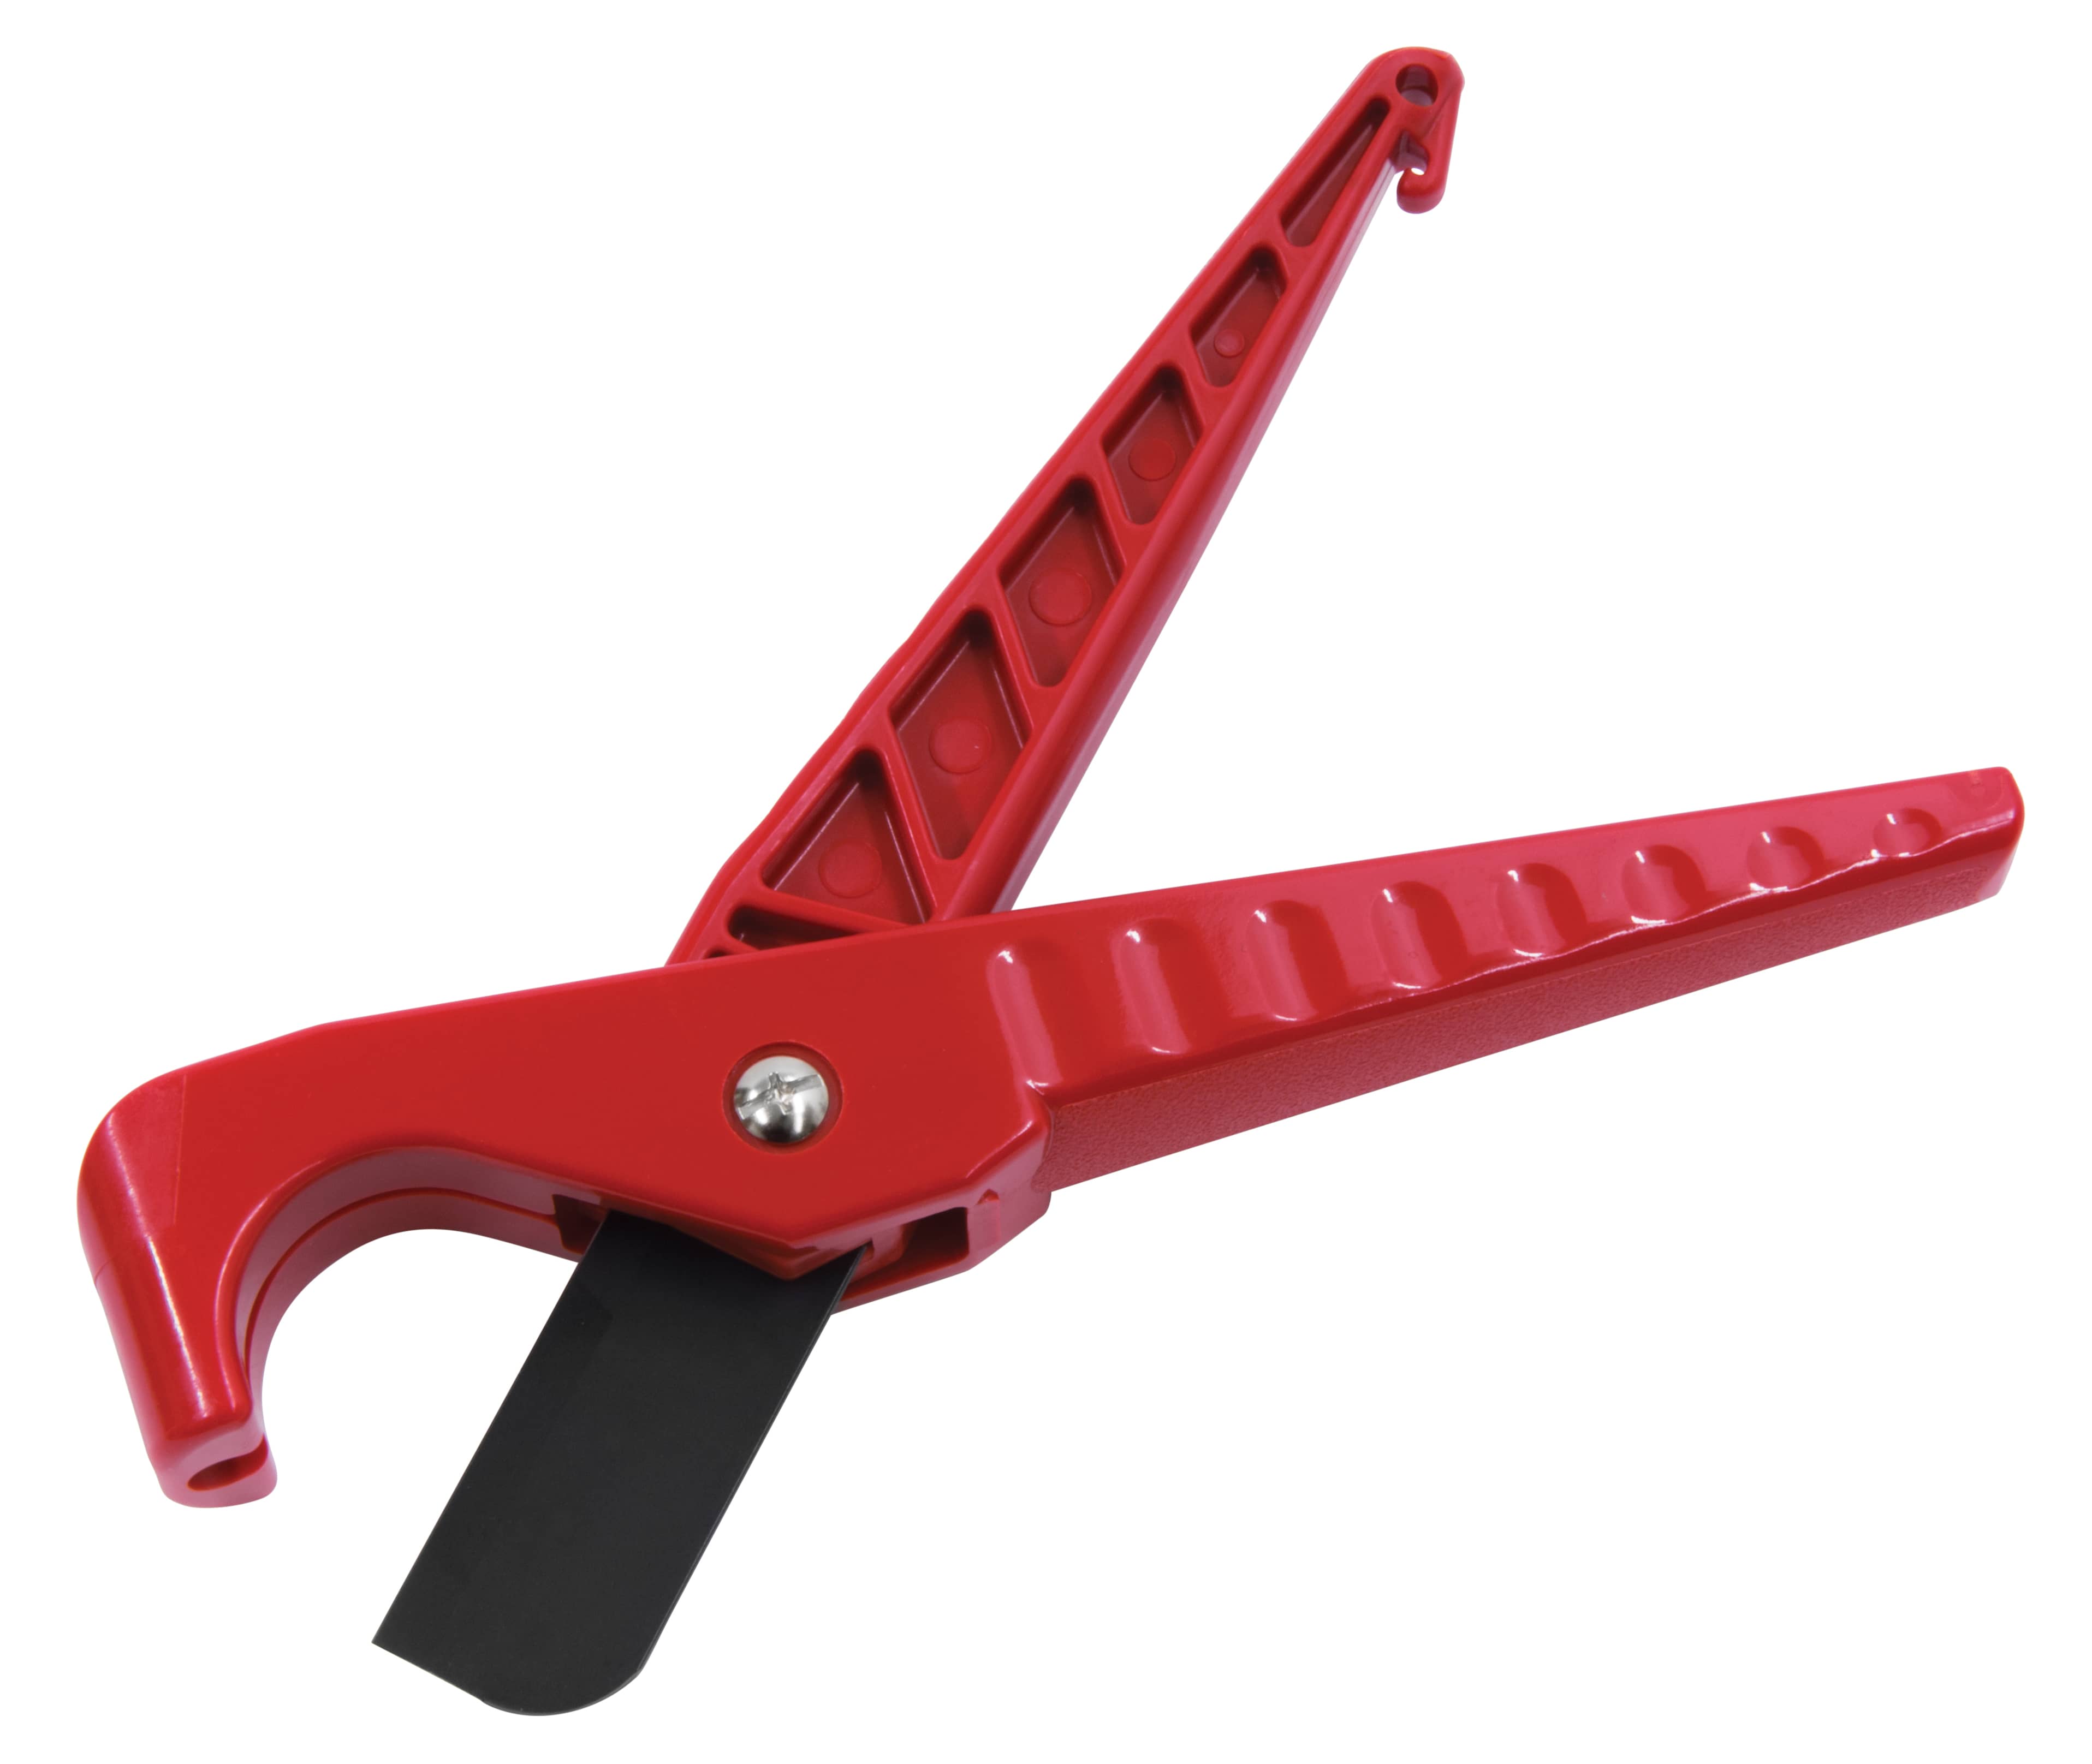 Reed Scissor Shears up to 1.7" Capacity Cleanflow